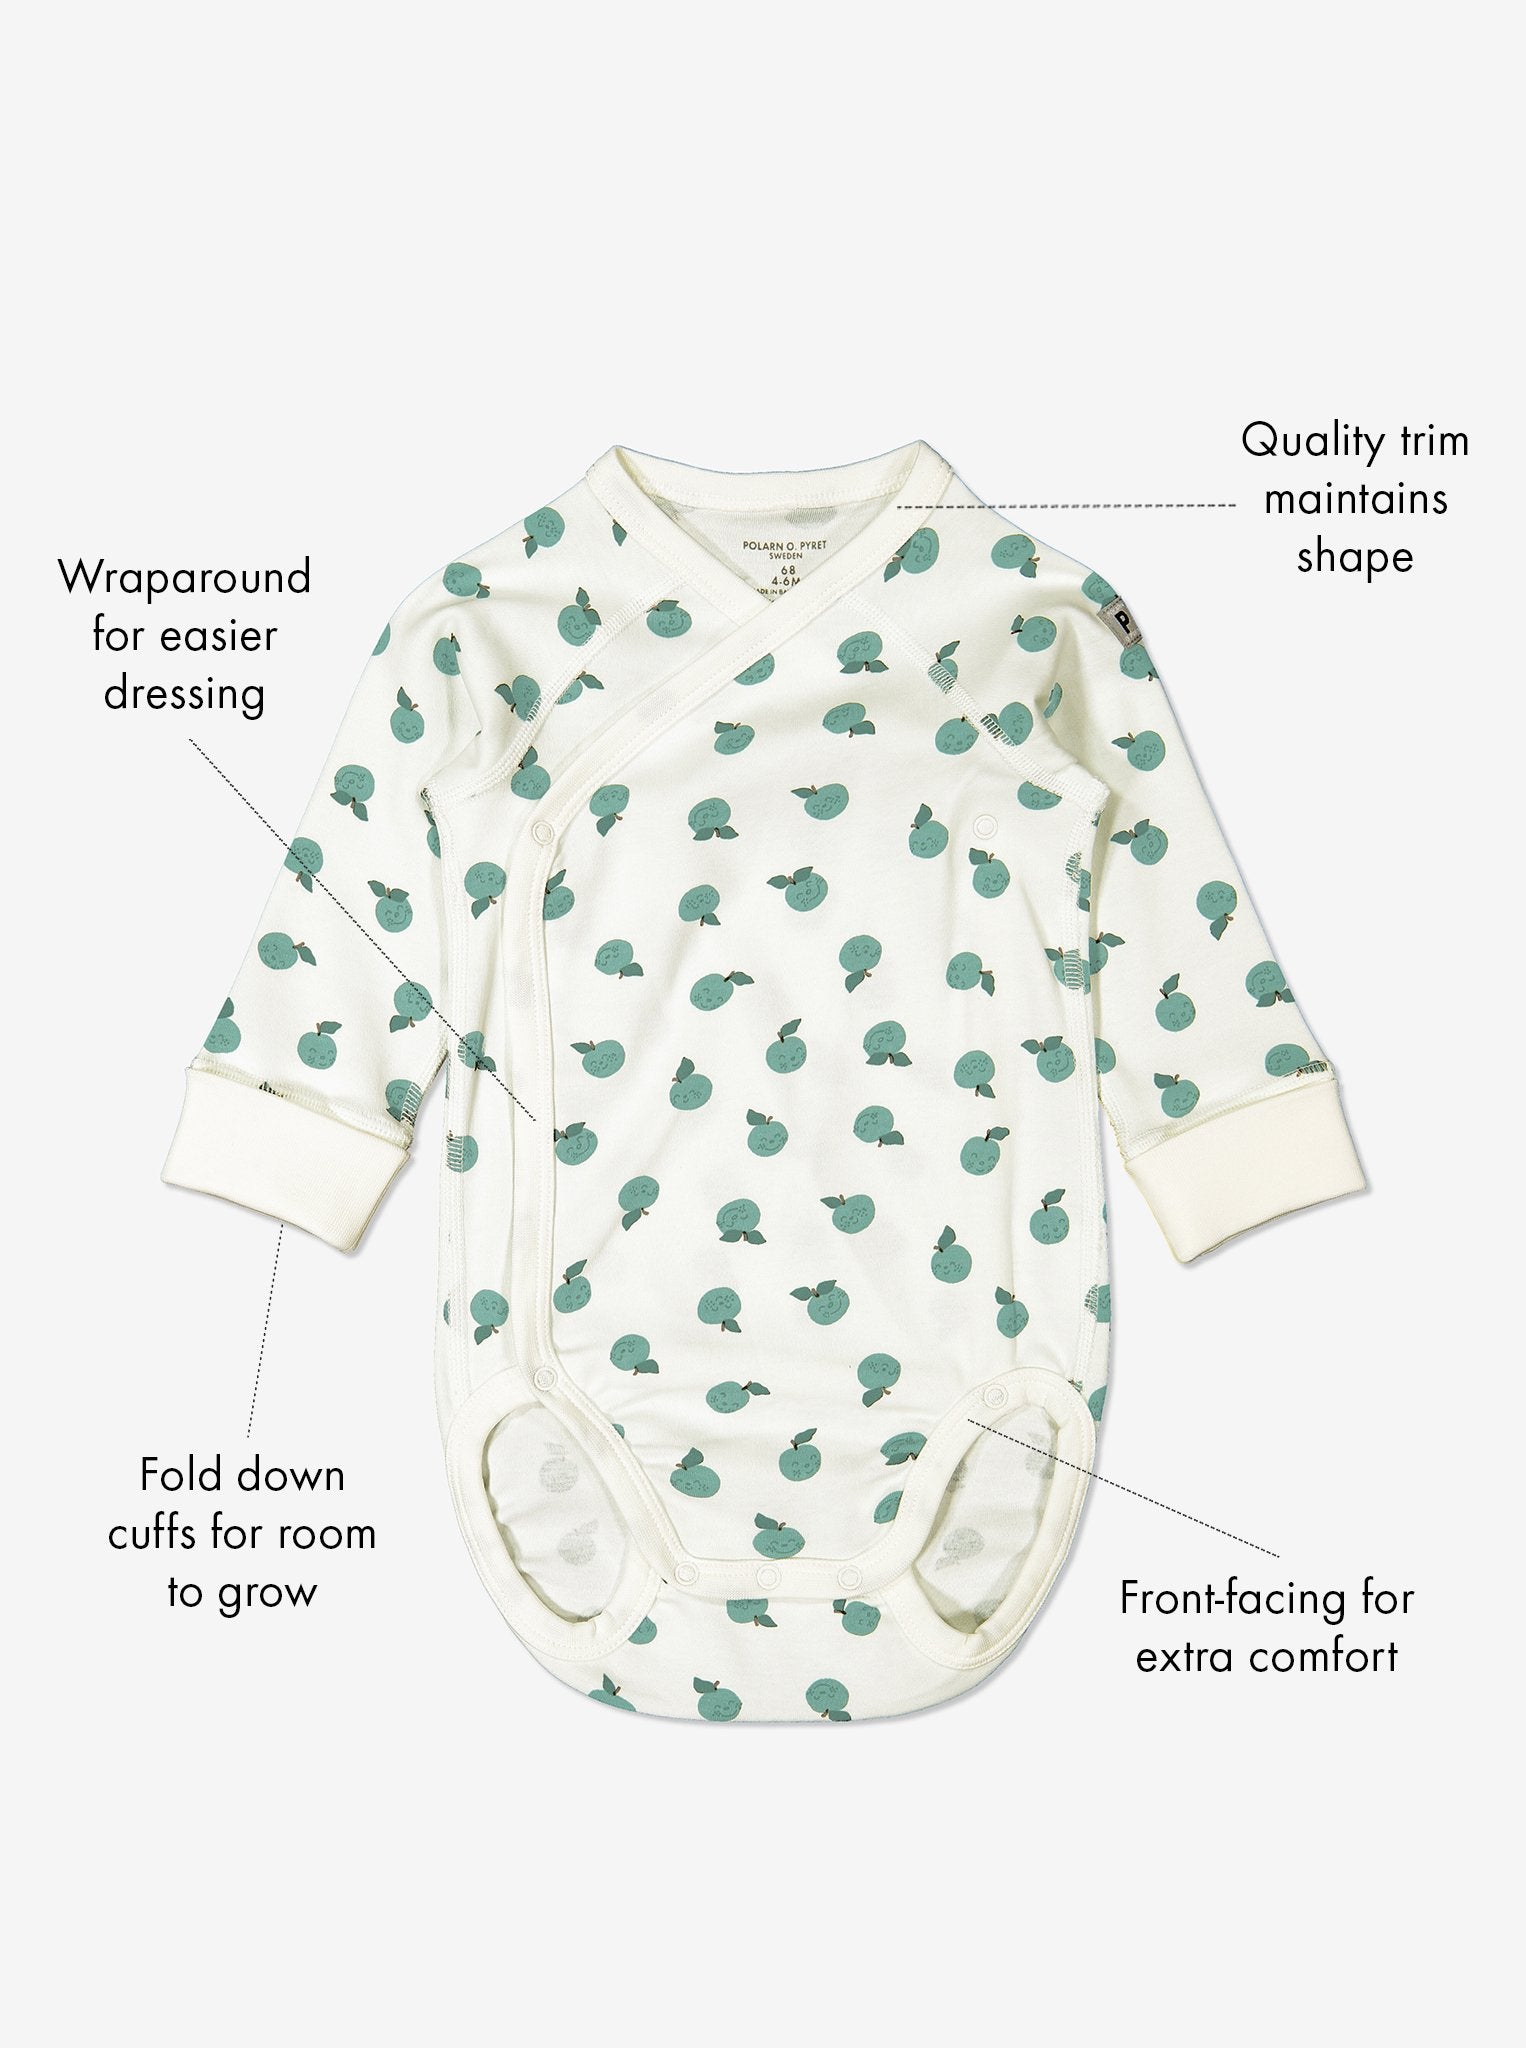 GOTS organic cotton long sleeve newborn babygrow in a unisex apple print with text labels shown on the sides